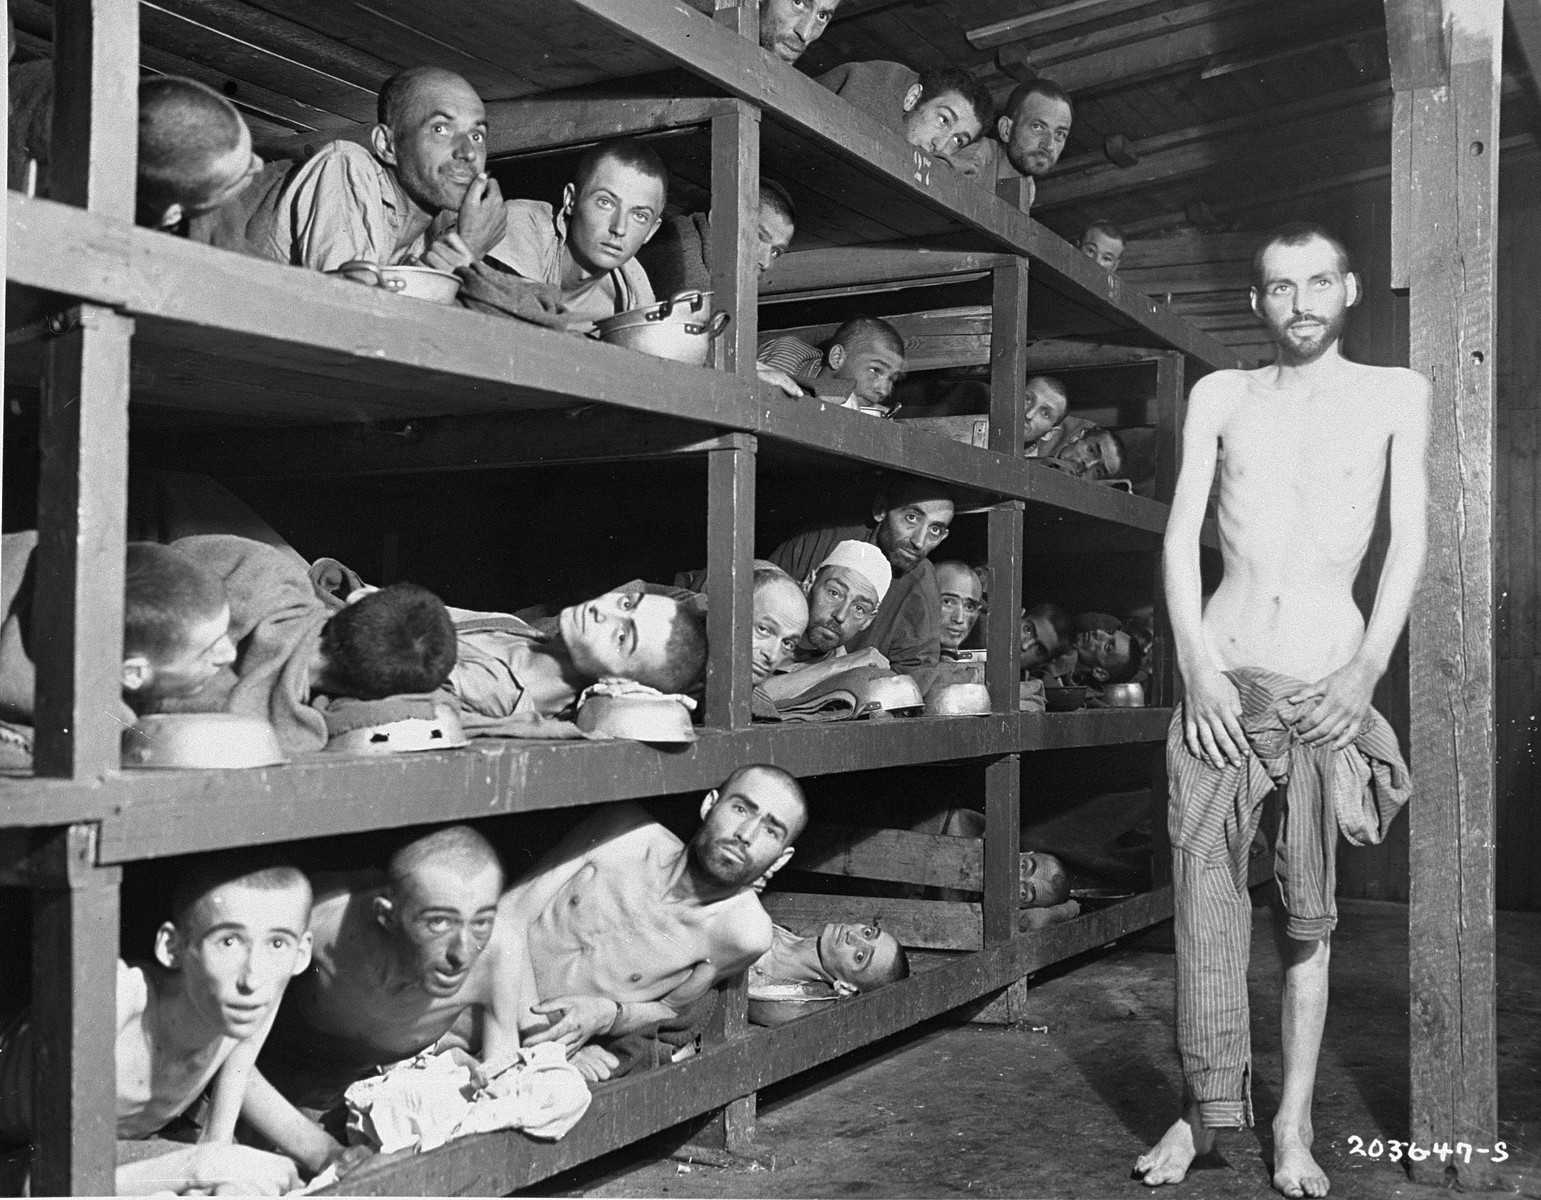 Former prisoners of the "little camp" in Buchenwald stare out from the wooden bunks in which they slept three to a "bed."  

Elie Wiesel is pictured in the second row of bunks, seventh from the left, next to the vertical beam.  

The man in the bottom left hand corner has been identified as Michael Nikolas Gruner, originally from Hungary, Gershon Blonder Kleinman or Yosef Reich.  Isaac Reich is in the bottom row, second from the right and Max Hamburger is on the bottom row, fourth from the left.  Perry Shulman from Klimitov, Poland is on the top bunk, second from the left (looking up).  The man in the second row, third from left has been identified as Dawid Najman.  The man in the second row, fourth from the left has been identified as Abraham Hipler;  Berek Rosencajg from Lodz or Zoltan Gergely from Cluj.  The man on the third bunk from the bottom, third from the left, has been identified alternatively as Ignacz (Isaac) Berkovicz, Abraham Baruch and Joseph Icovic )from Tecovo) .  Juraj (now Naftali) Furst is pictured in the third bunk, fifth from the left.  The man standing on the right has been identified as Chaim David Halberstam, and also as Simon Toncman.  In the top left bunk, far right is Oscar Kleinshpitz (later Haberkorn).  The man pictured in the middle bunk, fifth from the left (wearing a white cap) has been identified as Simon Brommet,.  Simon was born in Amsterdam and was captured in Belgium. He survived a labor camp in Auschwitz, was marched to Buchenwald in the winter of 1945, and was liberated by American troops on April 11, 1945.

Original caption reads:  "Slave laborers  pedred from their tomb-like, wooden bunks at the concentration camp at Buchenwald, near Weimar, Germany, when U.S. troops liberated the area.  Approximately 21,000 inmates - Russian, Polish, French, Italian, and Czechoslovakian - were freed.  They were described as "the living dead".  The camp doctors agreed that a t least 6,000 inmates had died as the result of German brutality during March, 1945.  In the Winter of 1939, the prisoners died at the rate of 900 daily.  In 10 years, more than 70,000 persons were starved and butchered in this atrocity center."